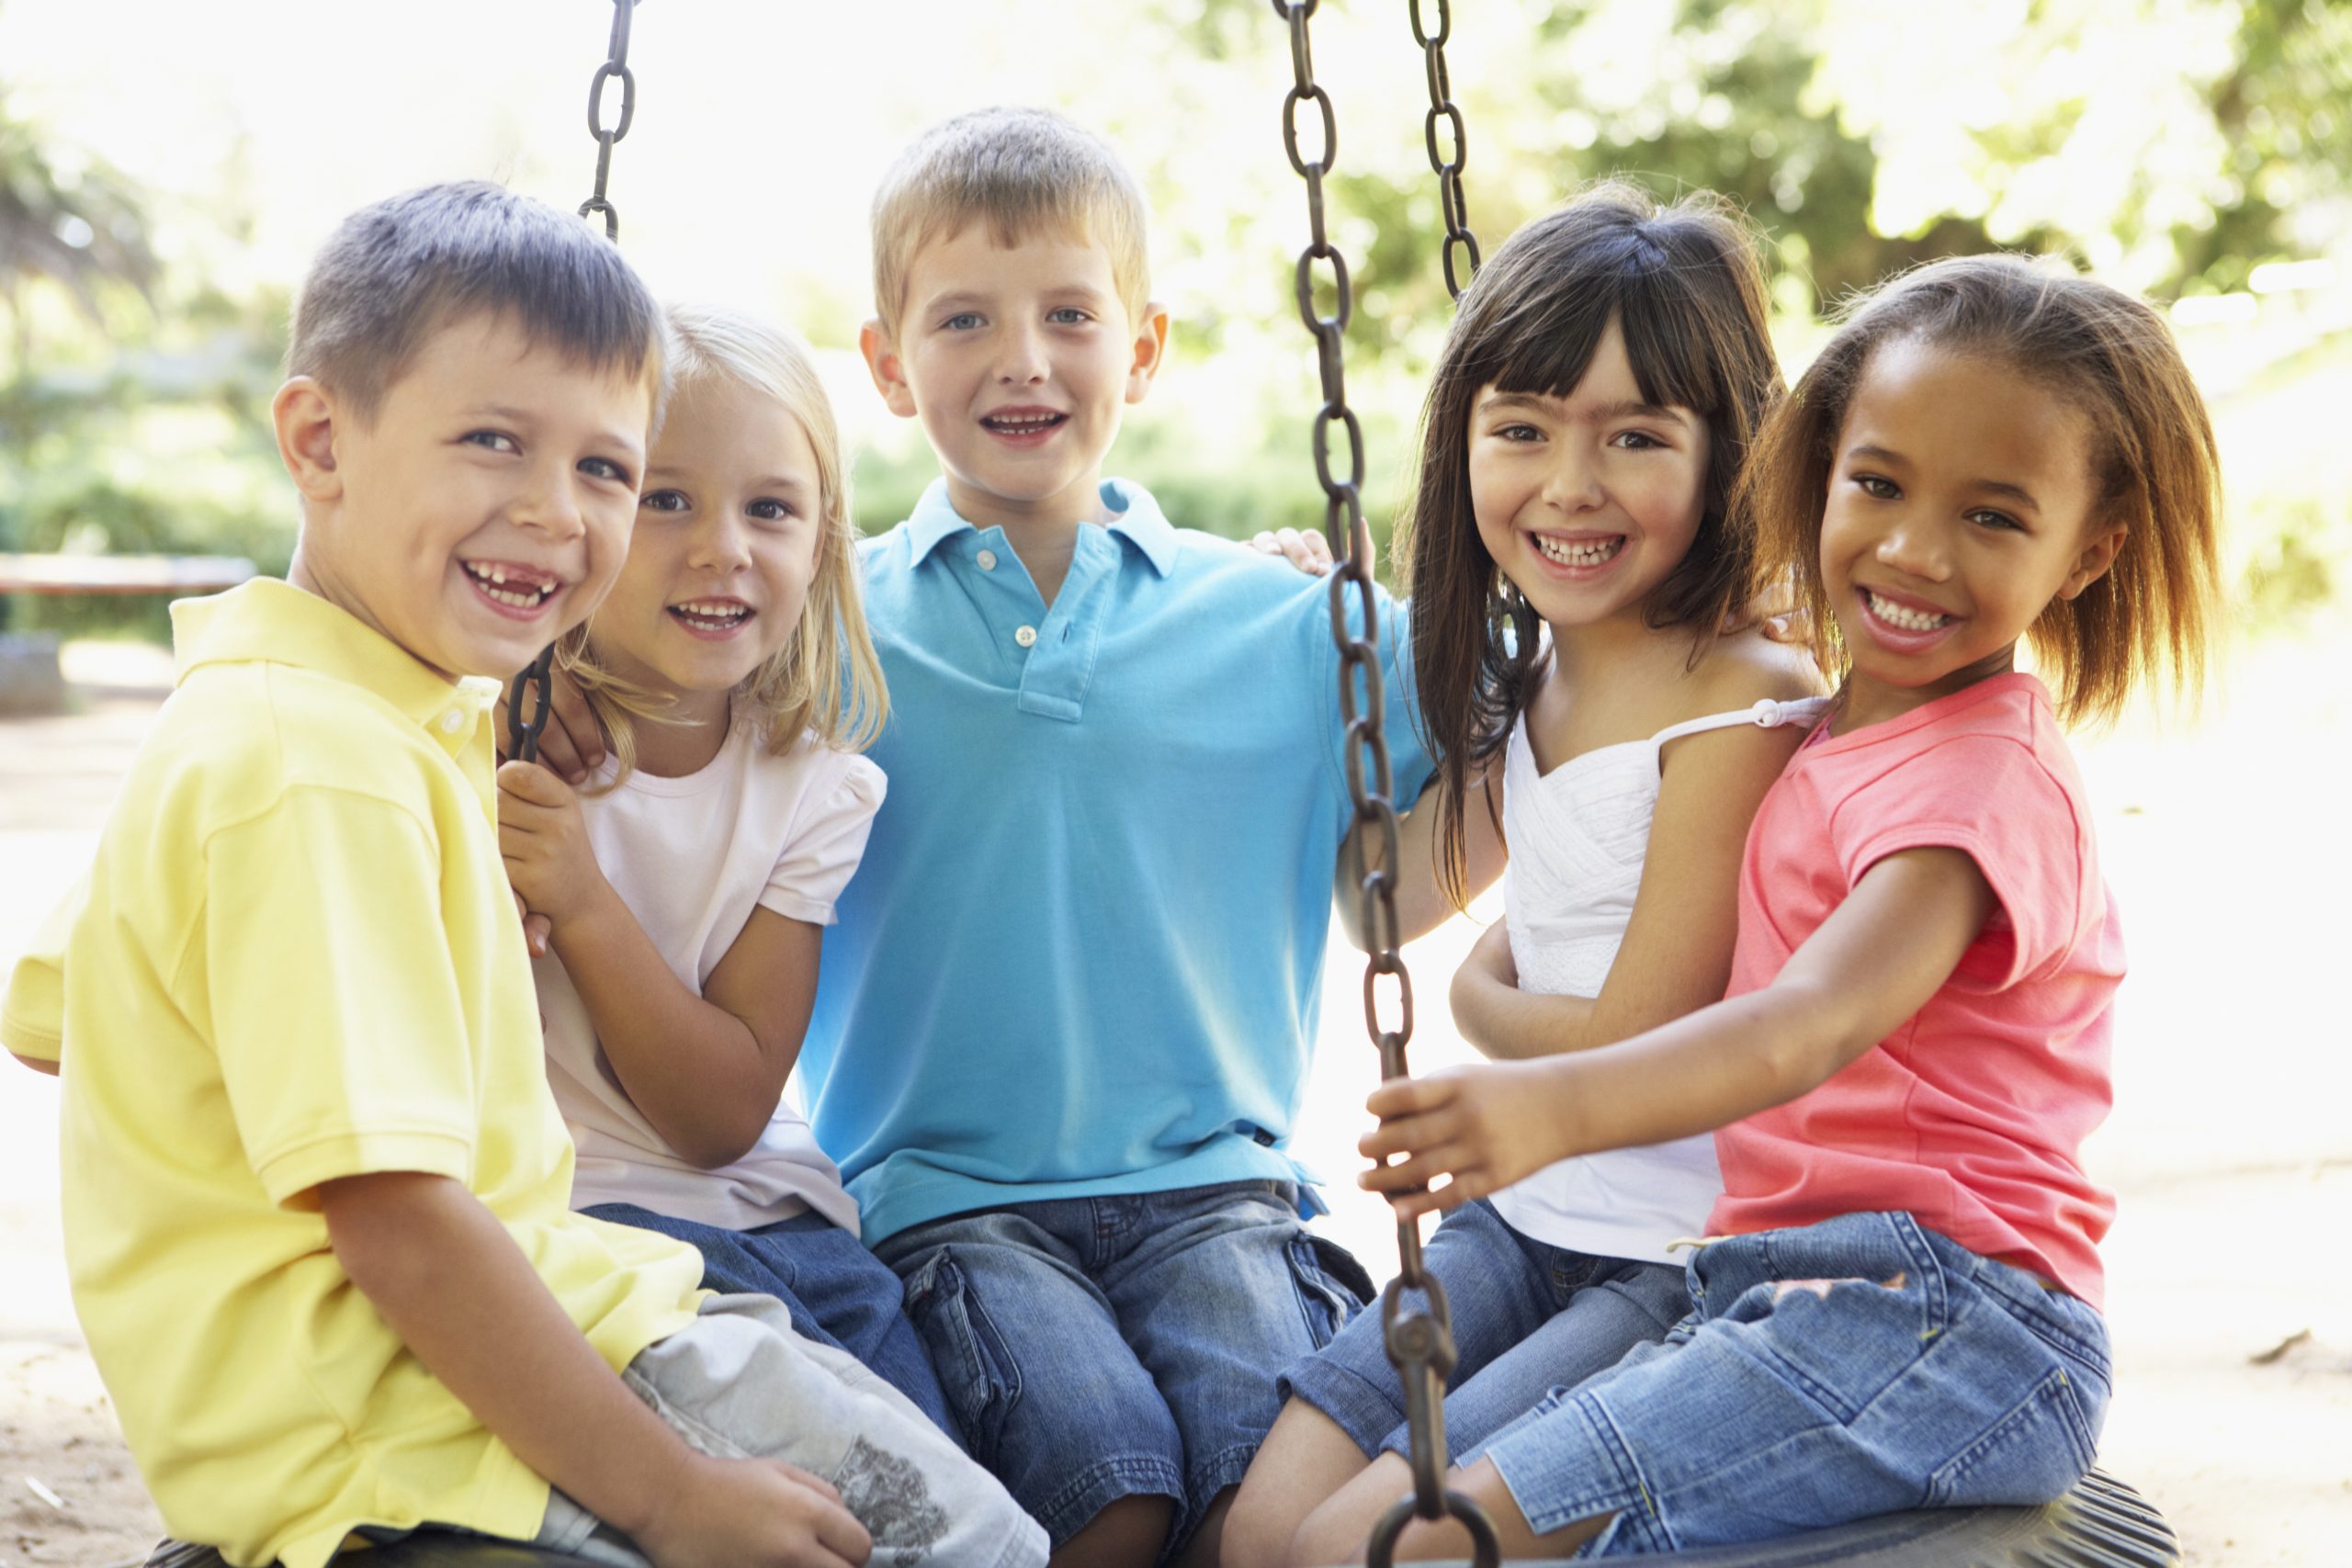 Five smiling children sitting together in a tire swing on a playground